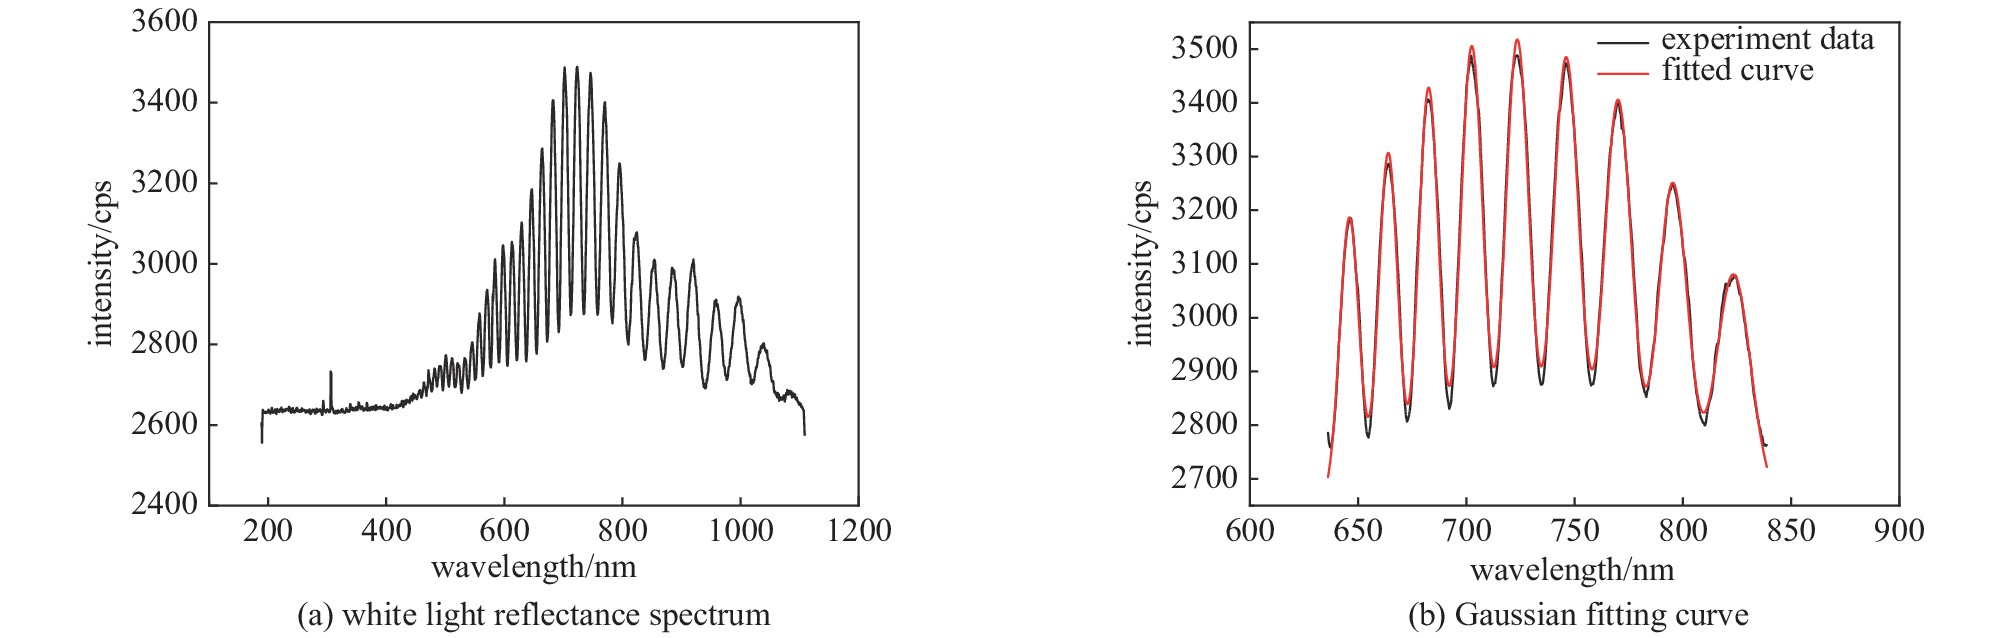 White light reflectance spectrum of target shell and Gaussian fitting curve in the local wavelength